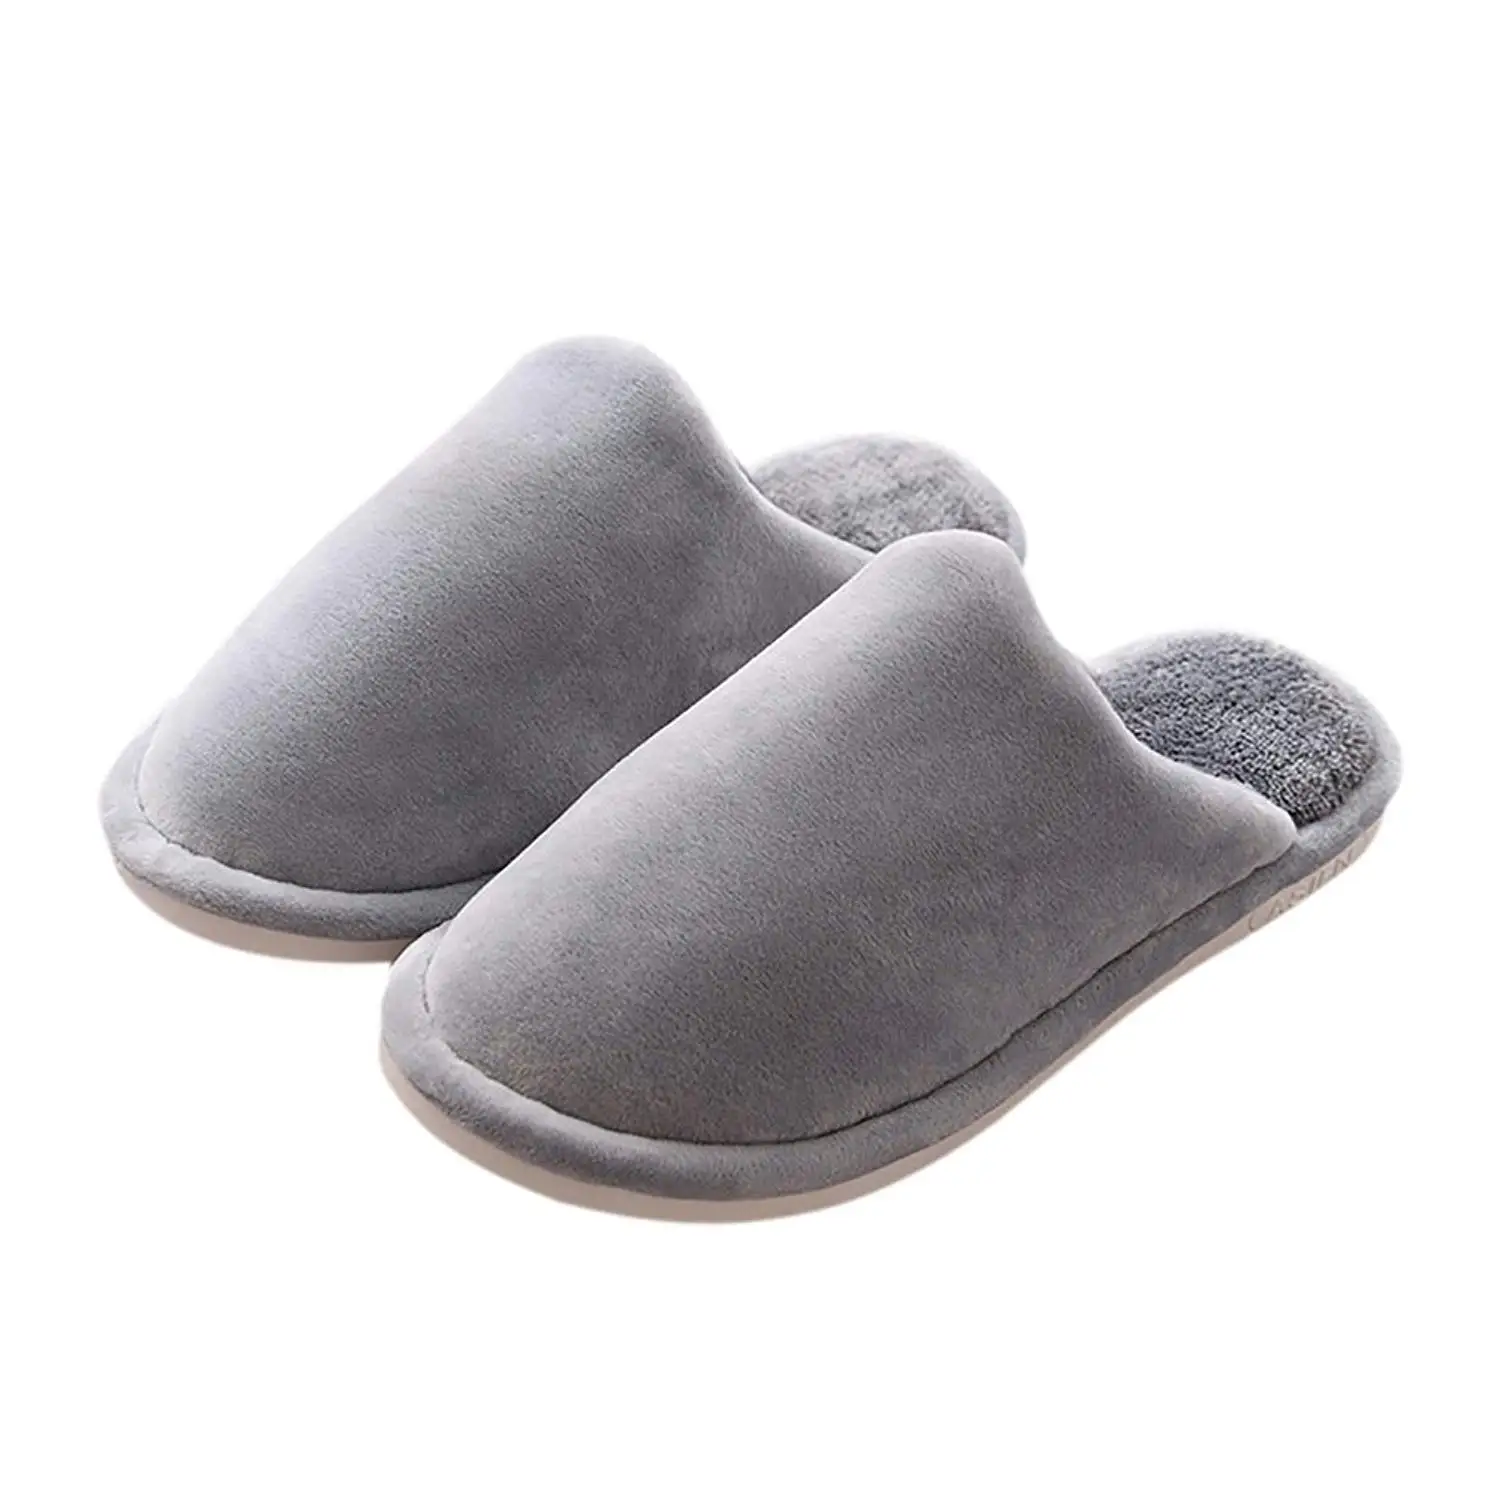 Cheap Bedroom Slippers, find Bedroom Slippers deals on line at Alibaba.com